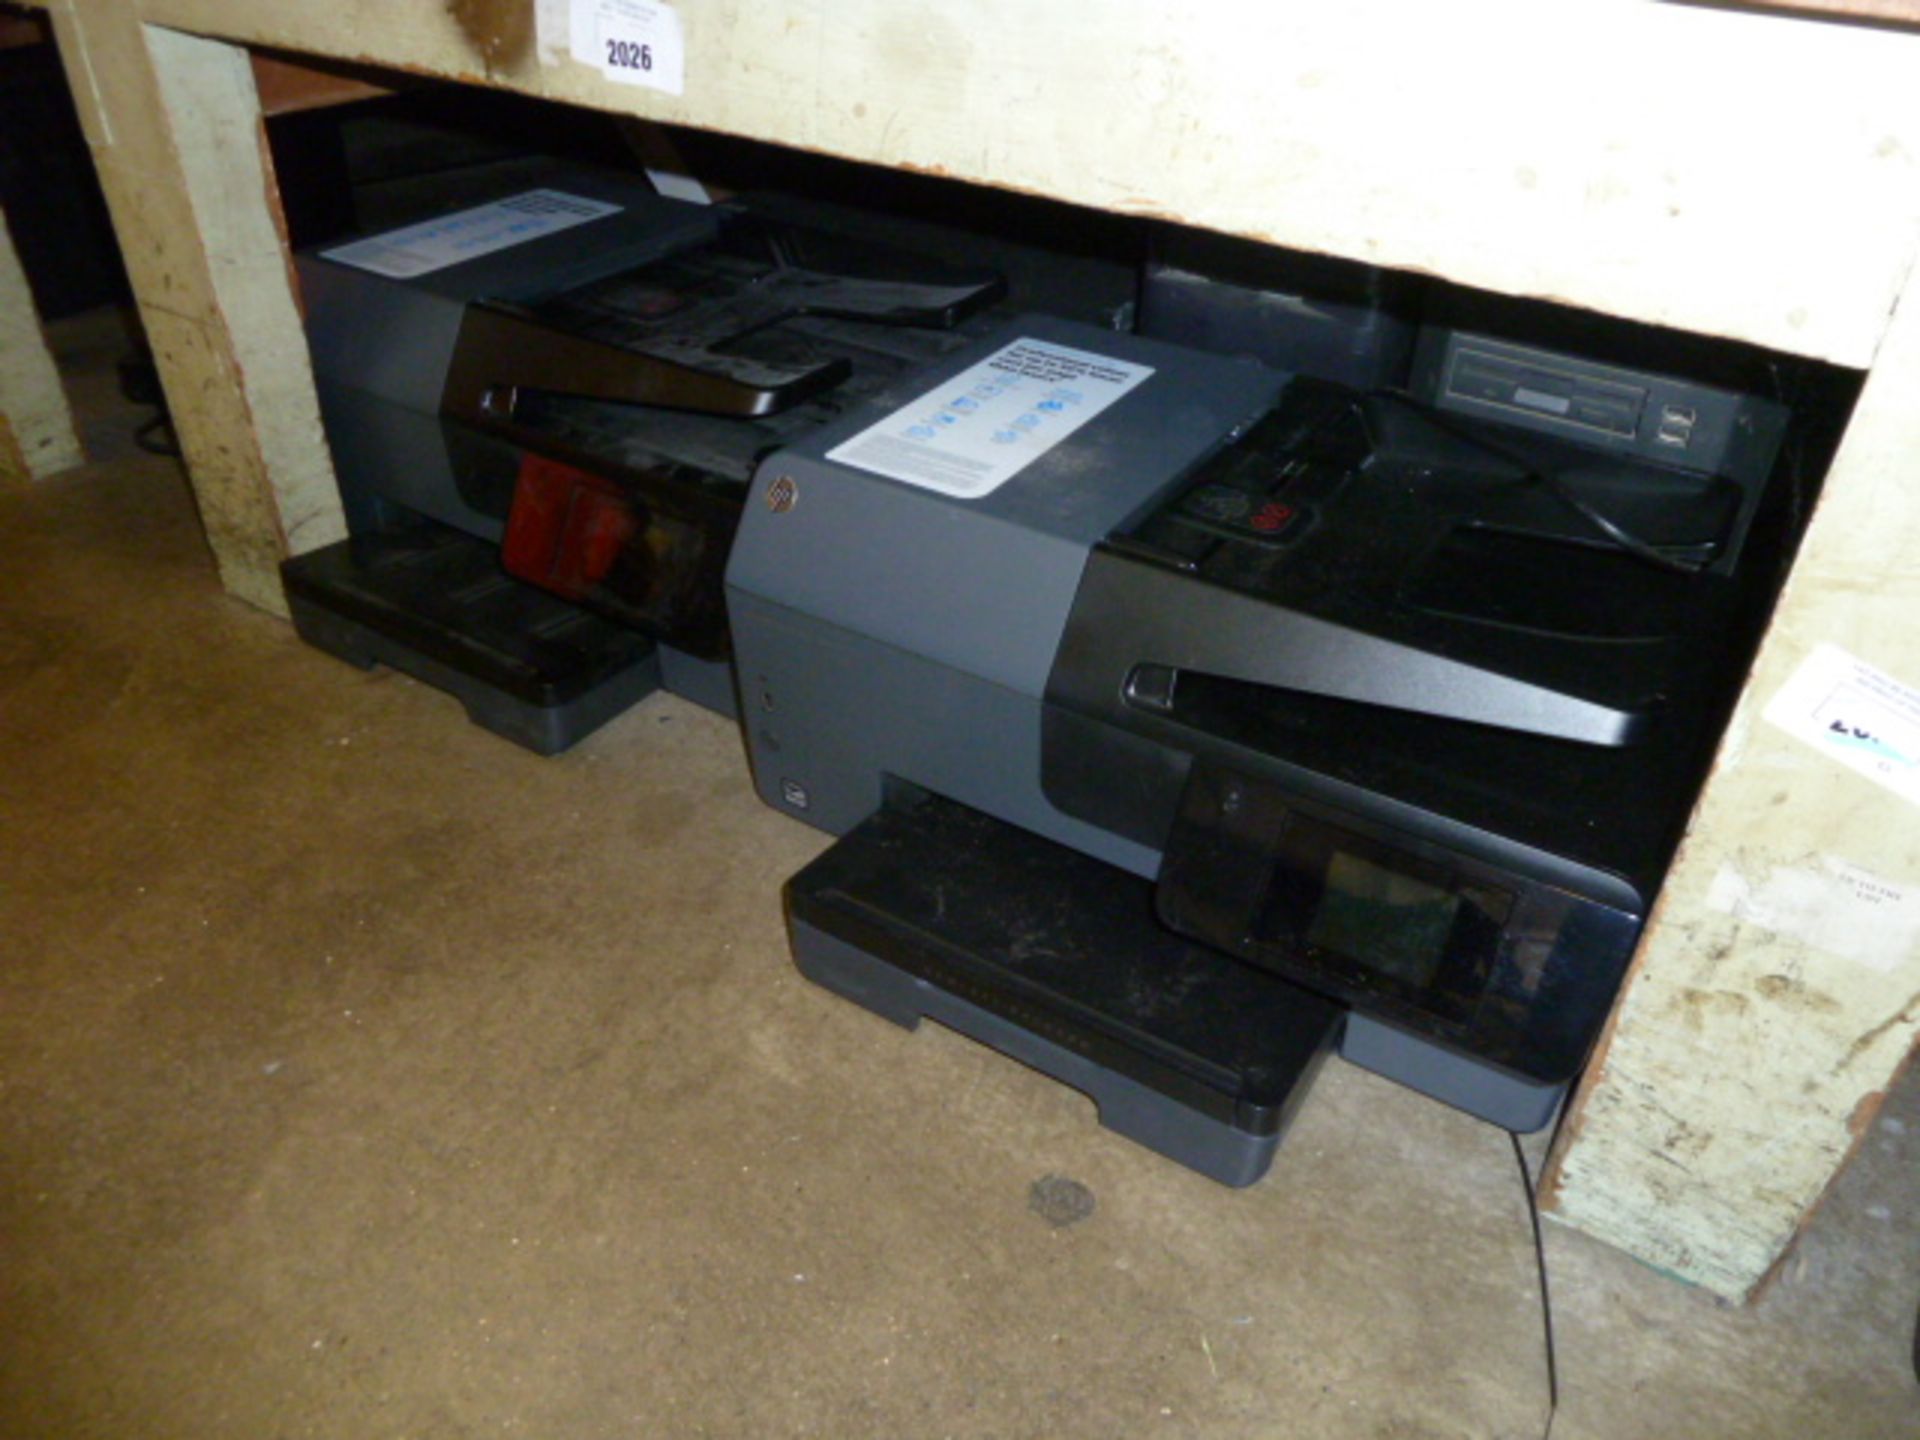 2 HP Office Jet Pro 65830 all in one printers